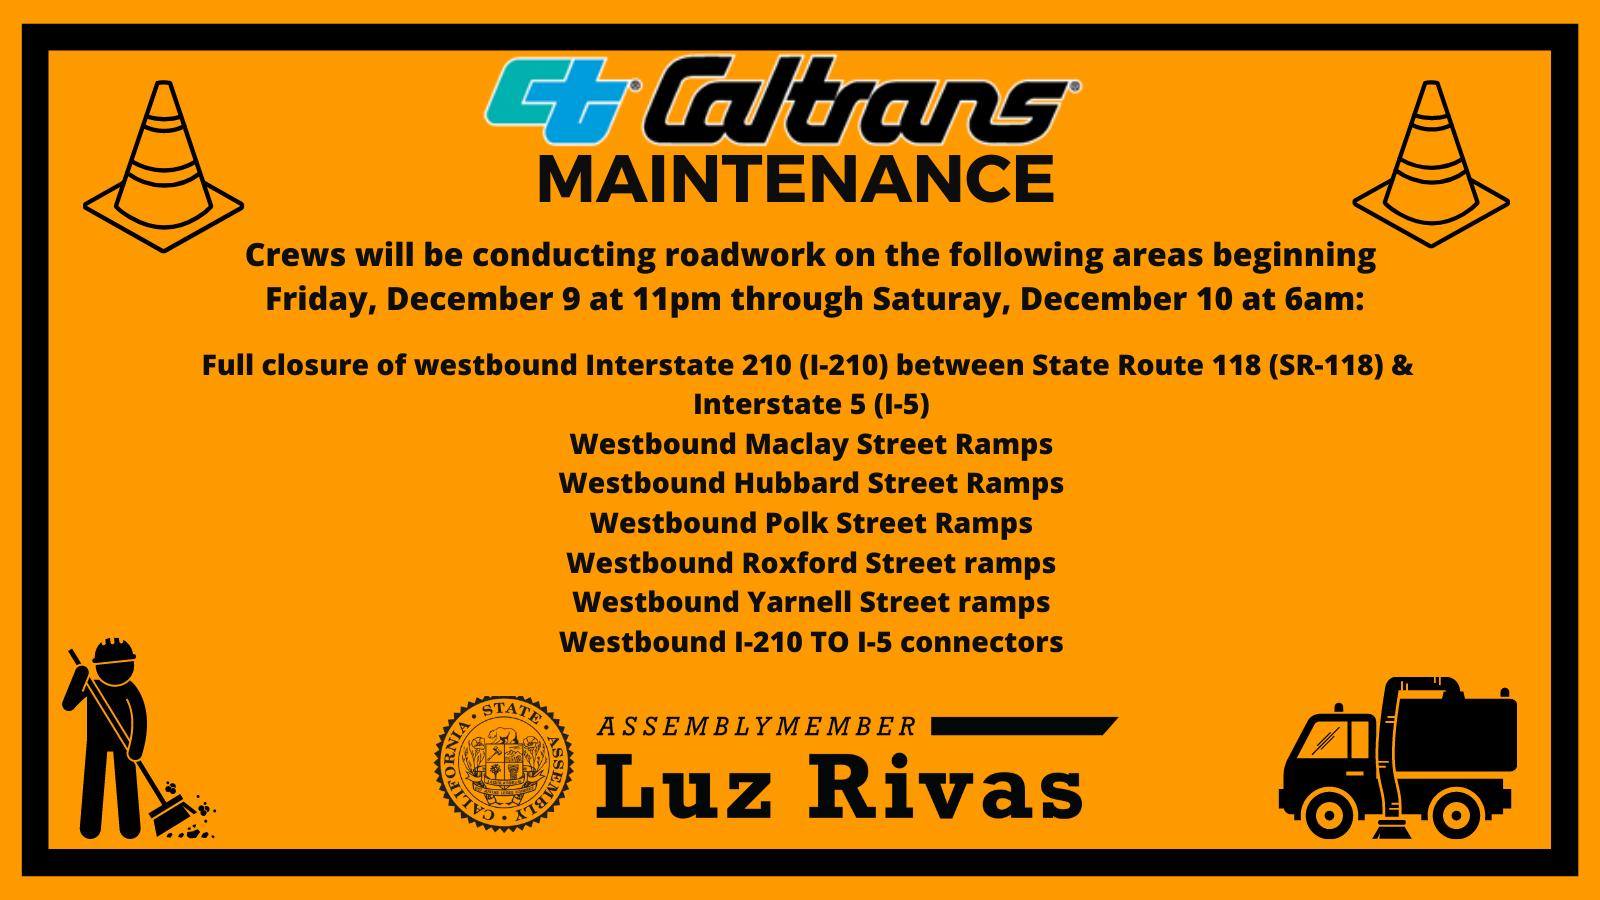 Caltrans District 7, AD43 will be Experiencing the Following Closures